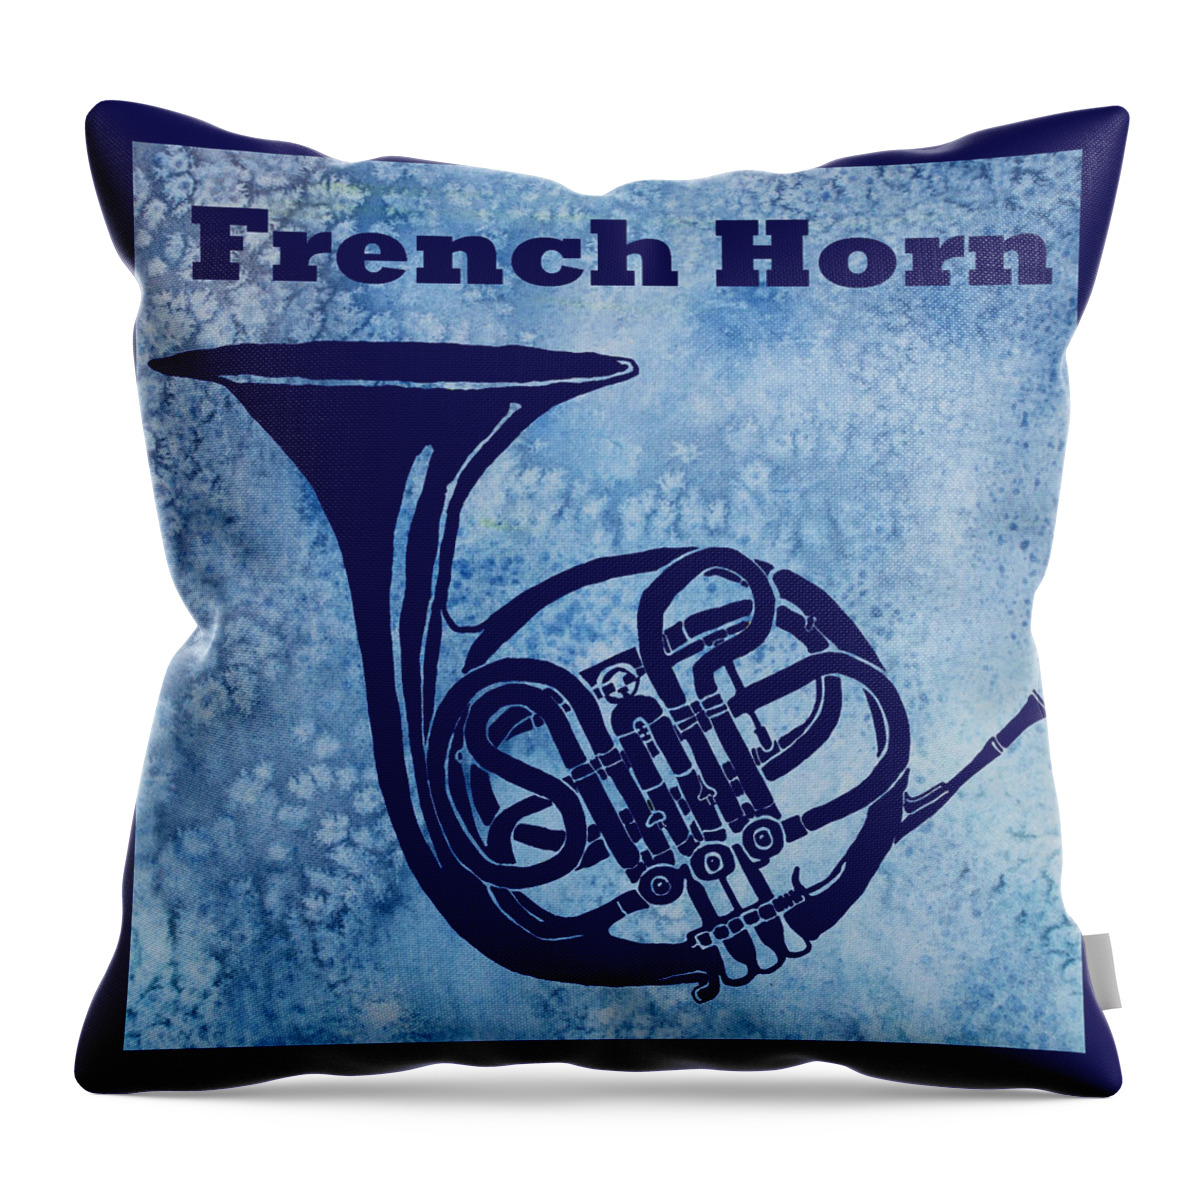 French Horn Throw Pillow featuring the digital art French Horn by Jenny Armitage